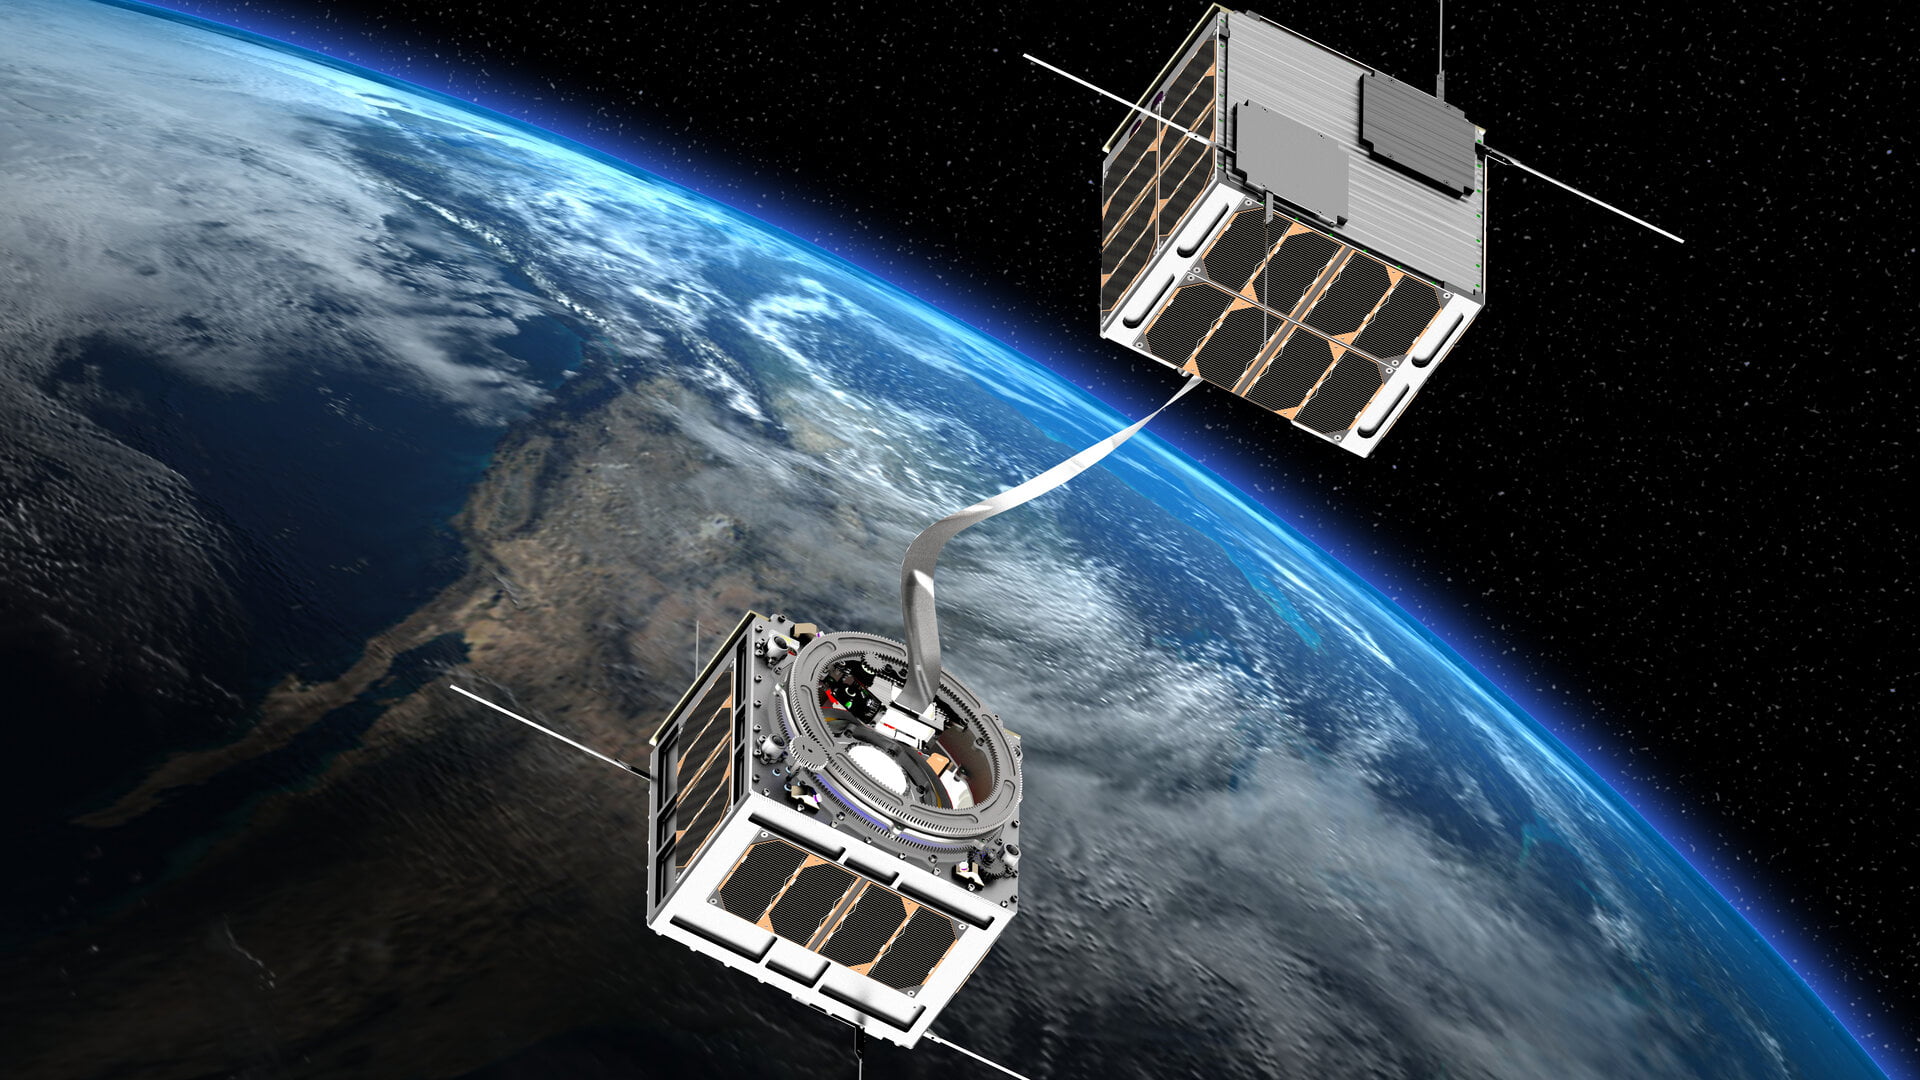 Tethered satellites for propulsion without fuel